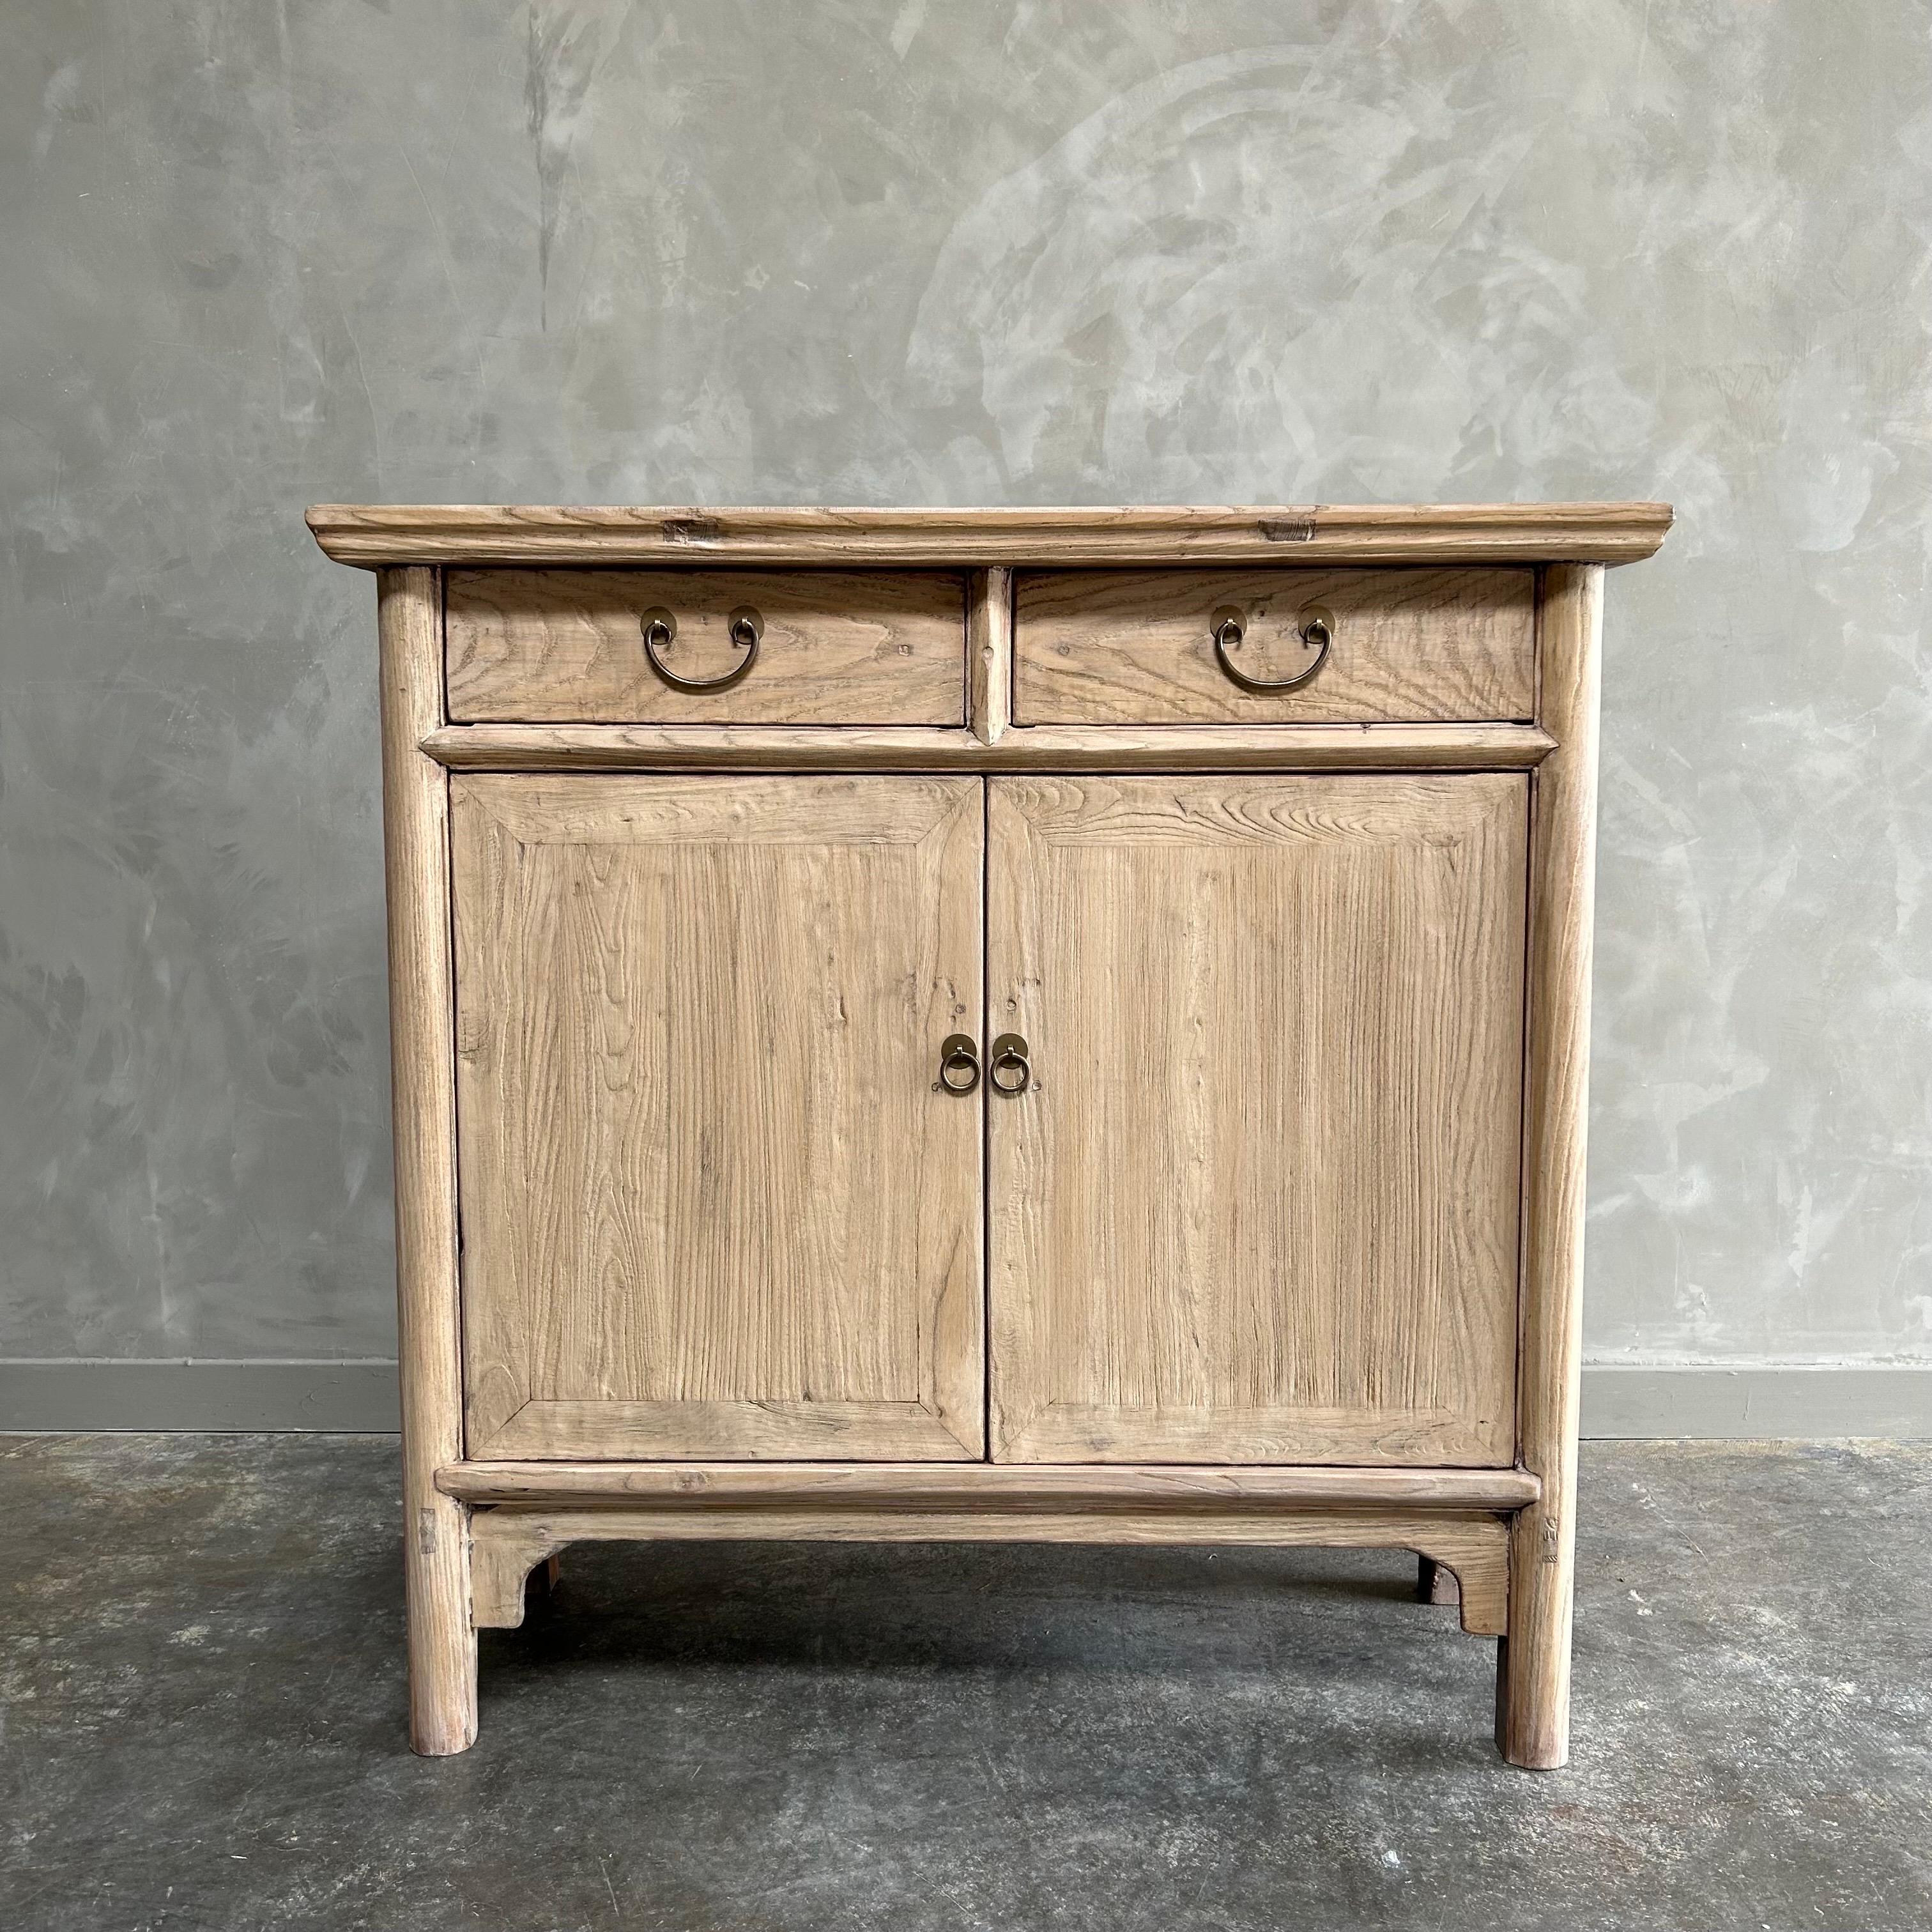 Bloom Home inc has over 2000 items in stock ready for immediate shipping, scroll down to view all of our items!
Elm cabinet 42”w x 18”d x 42”h
Inside Shelf: 12”d

Vintage Antique Elm Wood Cabinet made from Vintage reclaimed elm wood. Beautiful